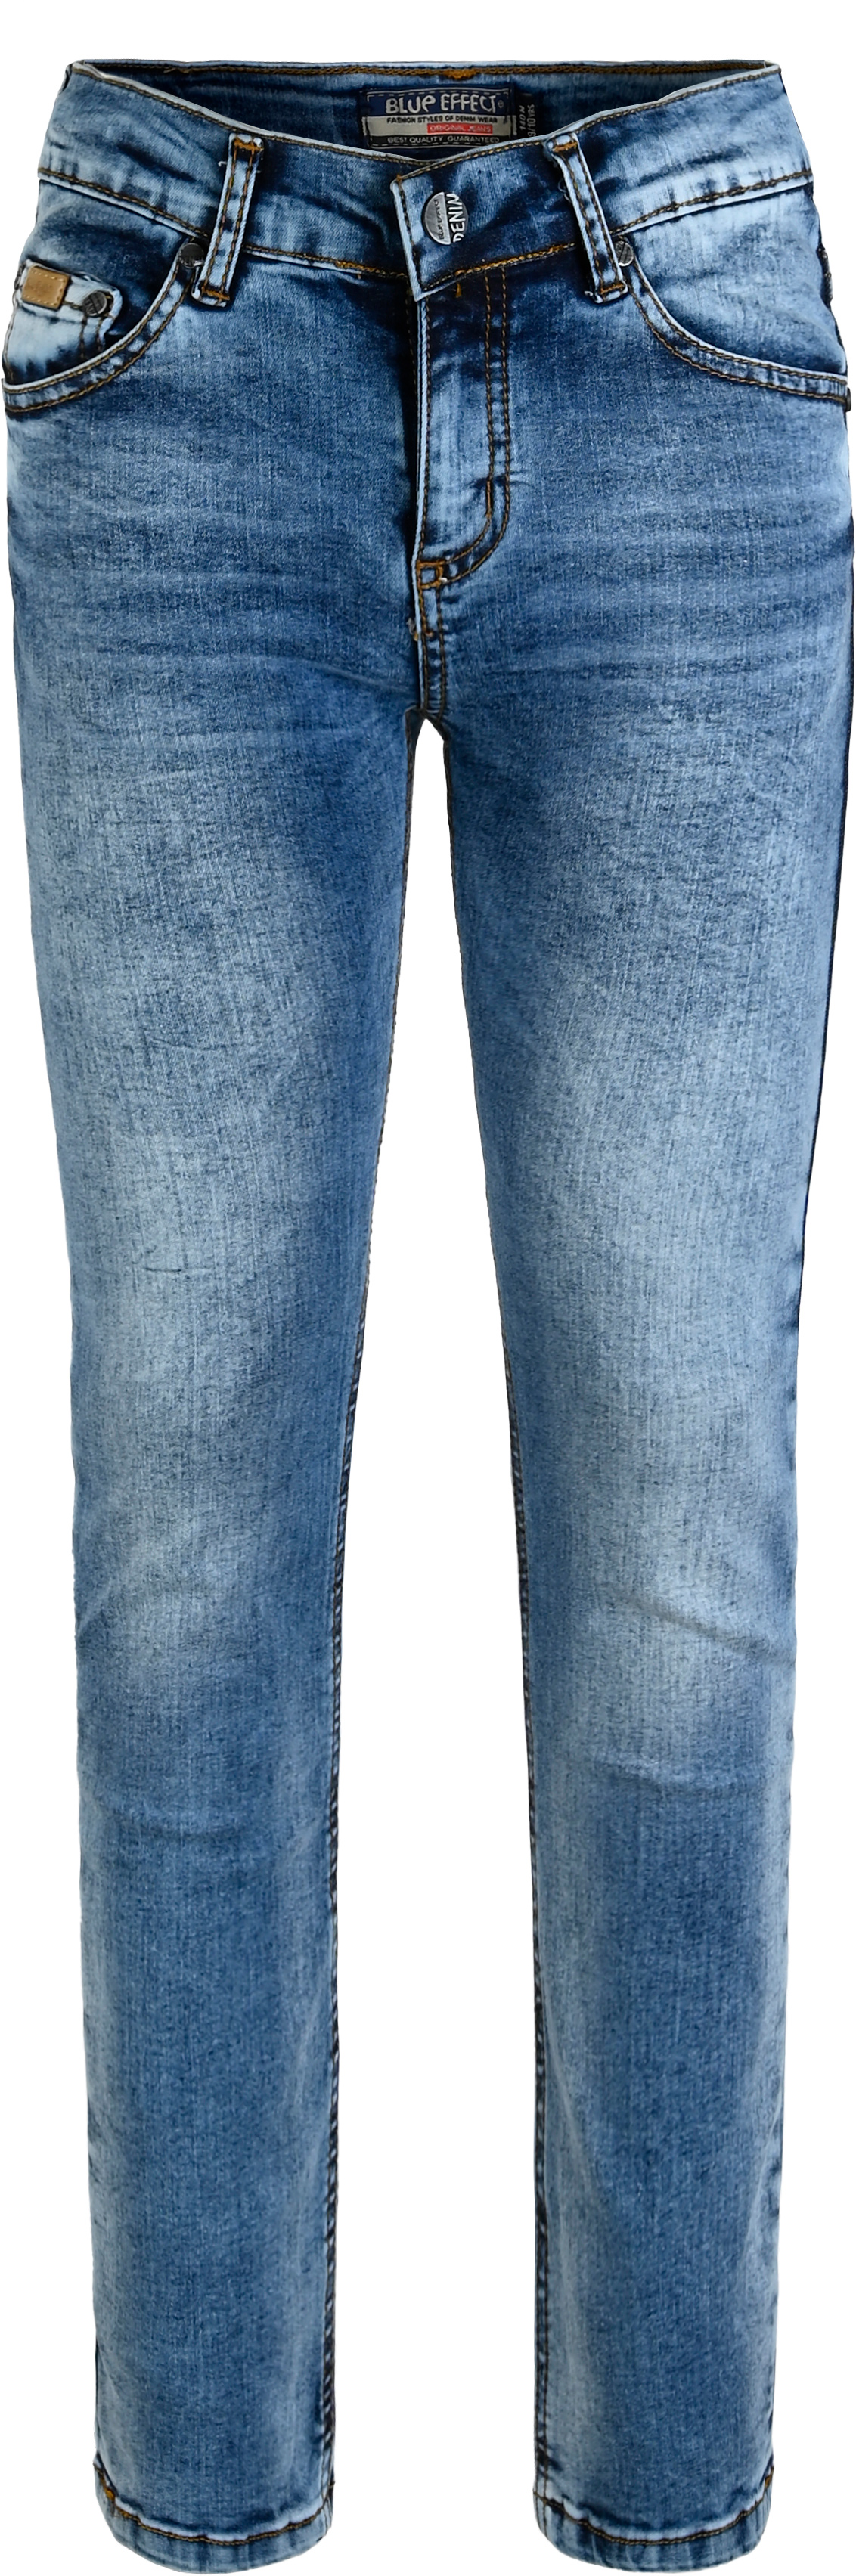 2833-Boys Relaxed Fit Jeans Ultrastretch, available in Normal